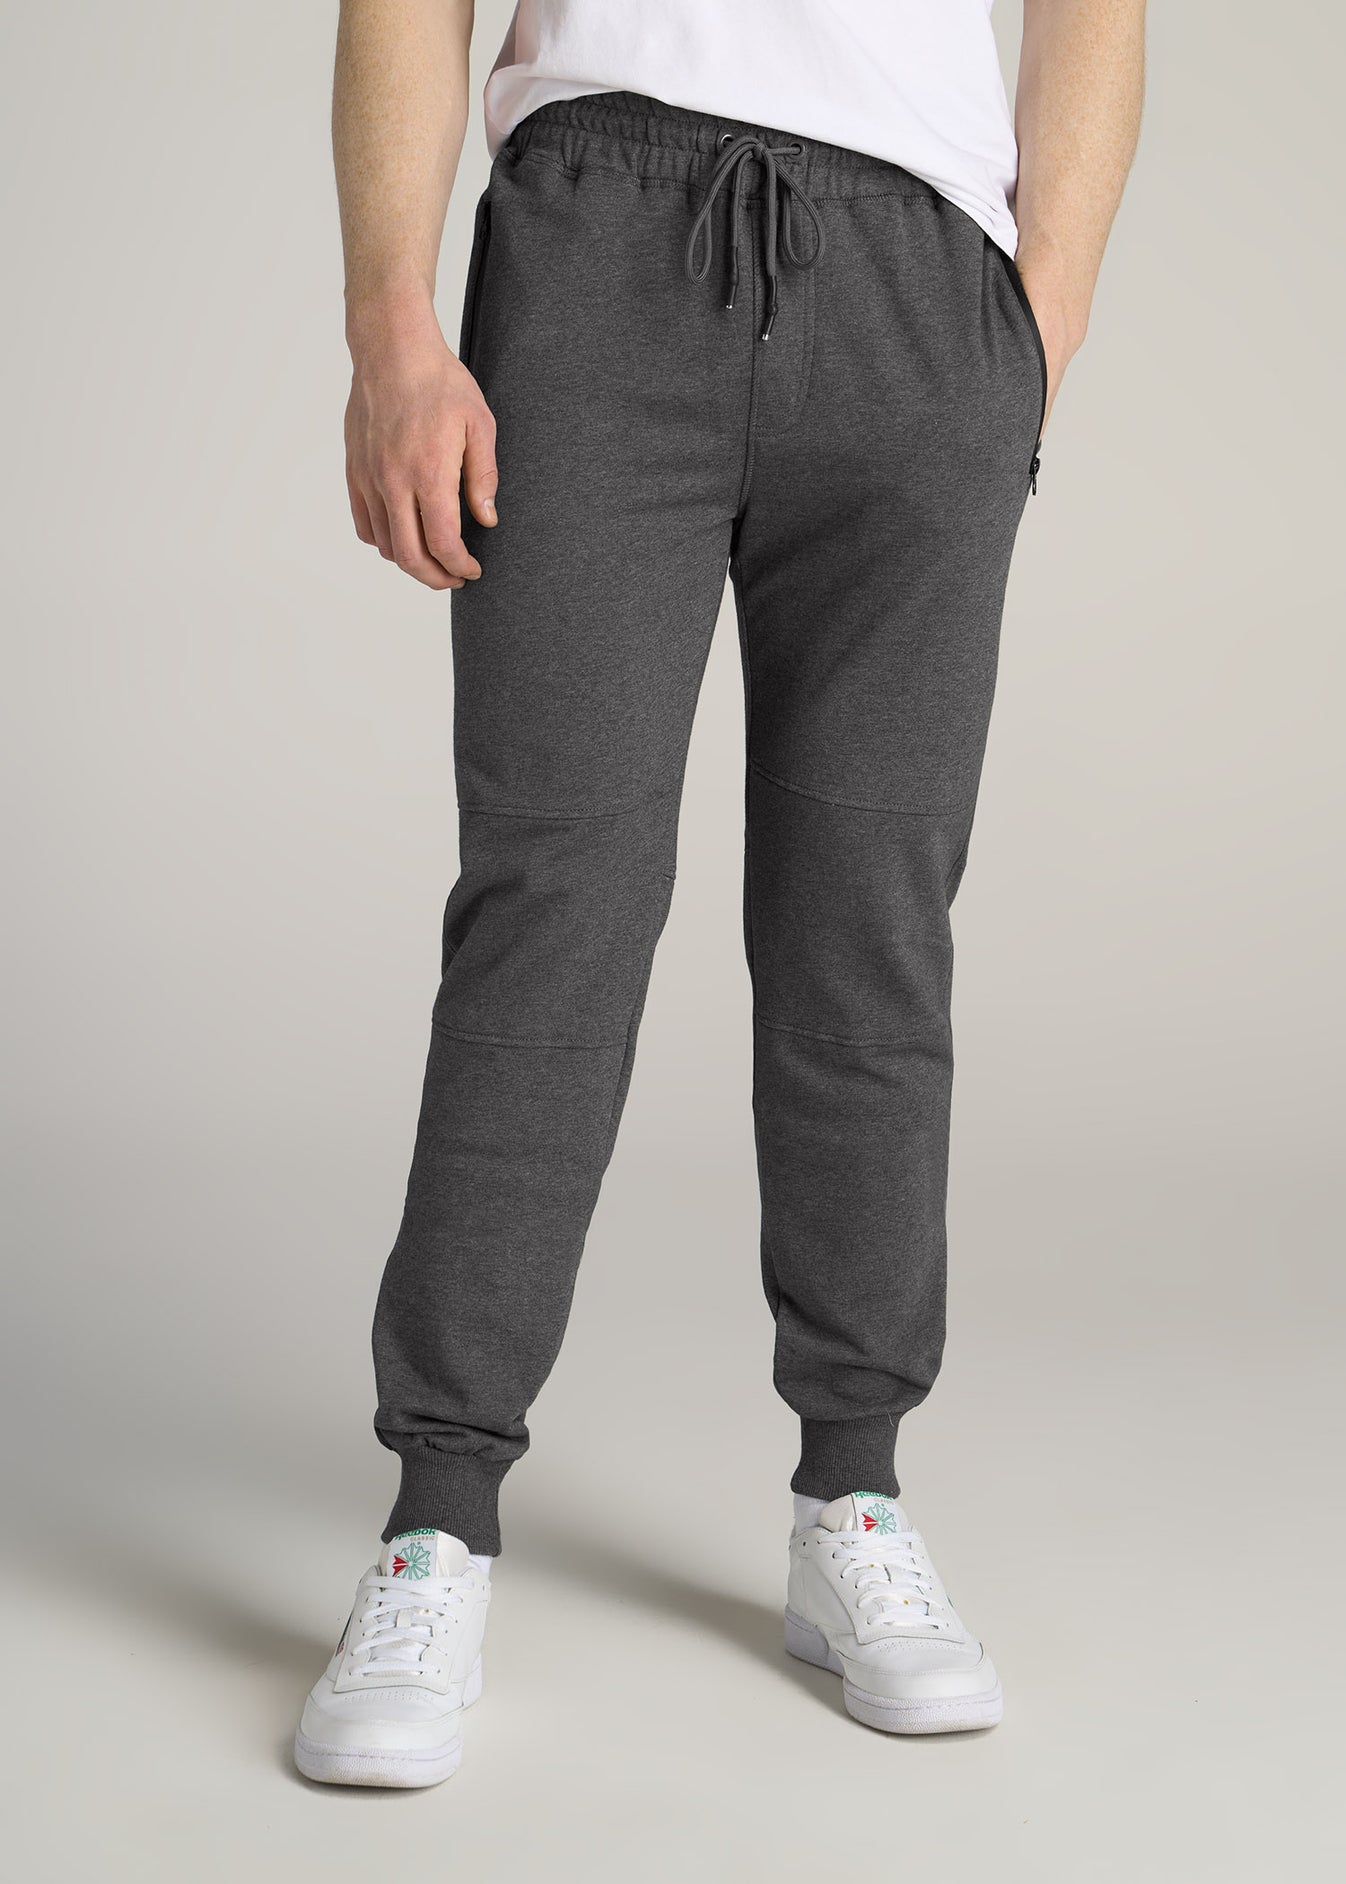 Wearever French Terry Men's Tall Joggers | American Tall